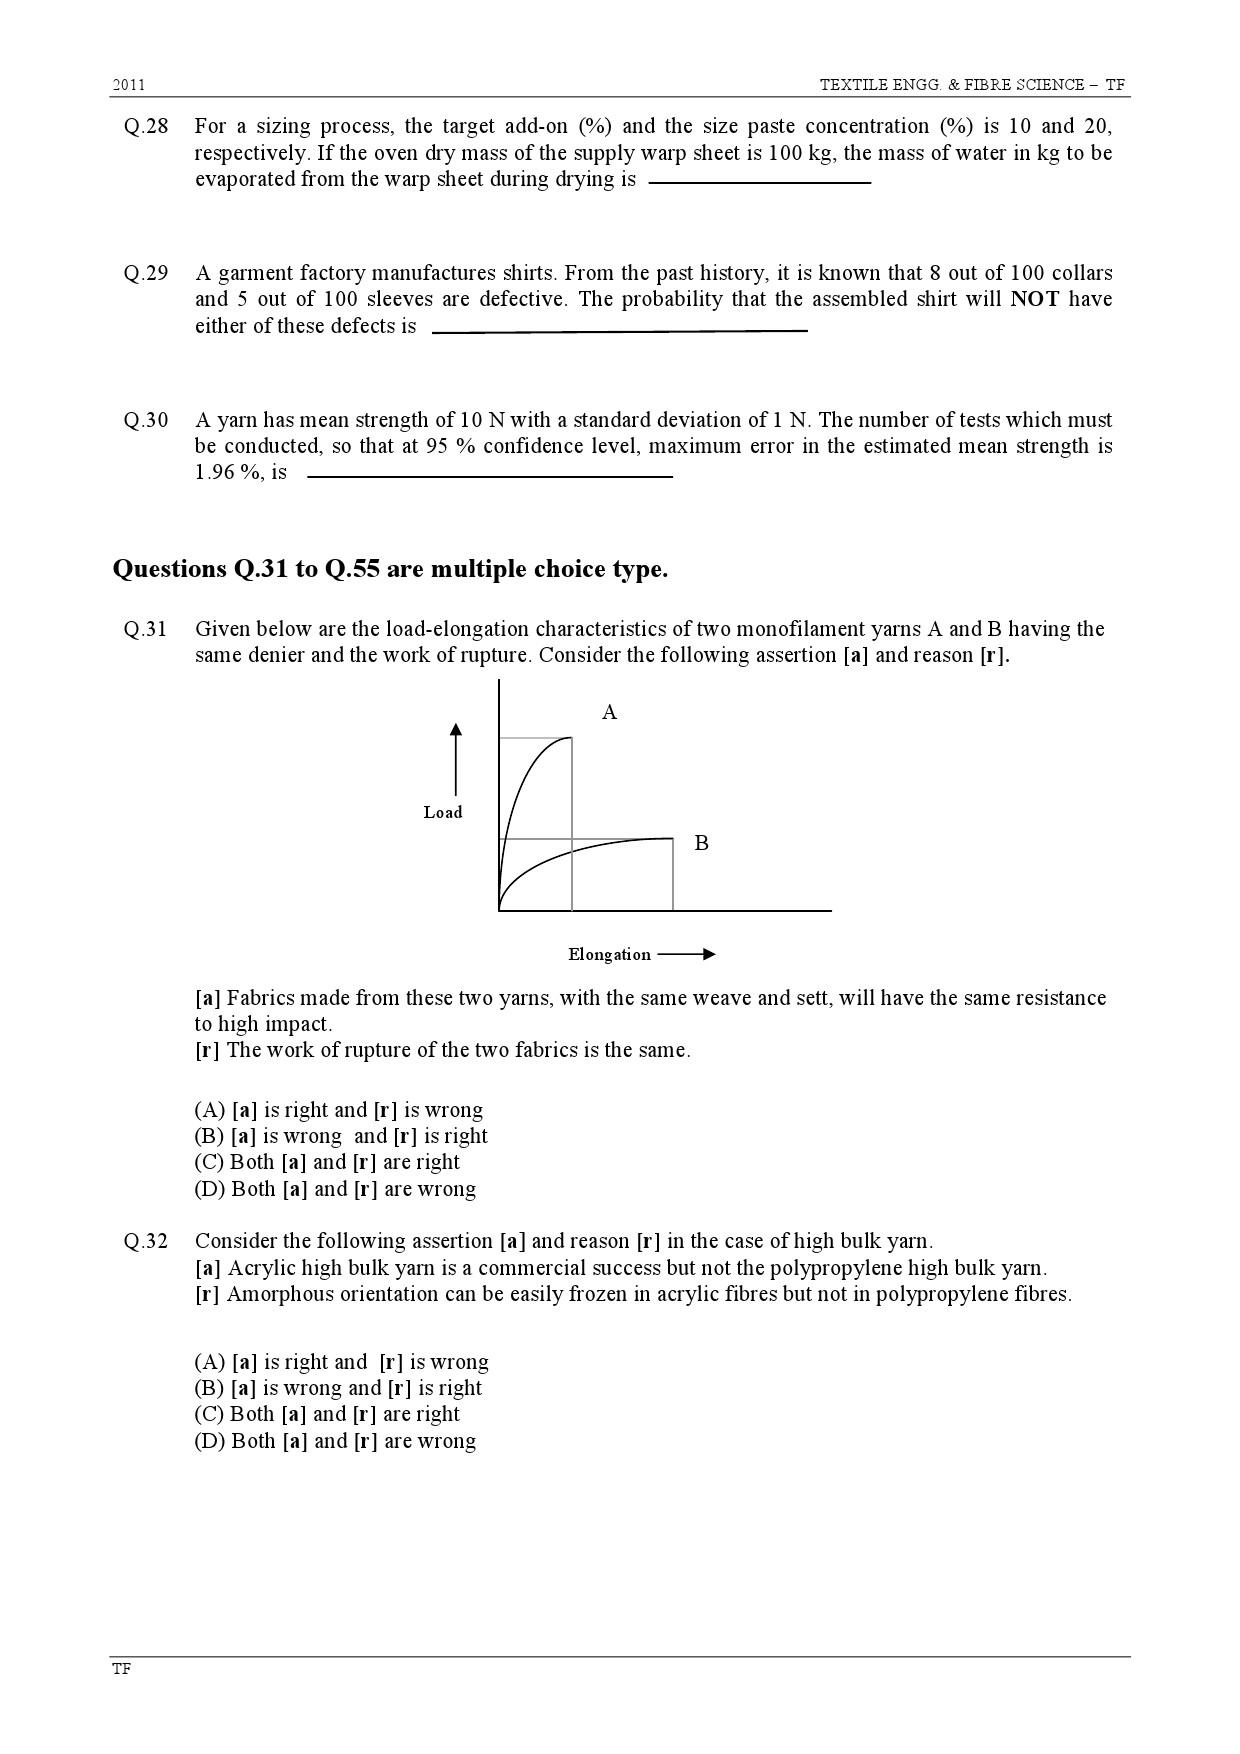 GATE Exam Question Paper 2011 Textile Engineering and Fibre Science 5